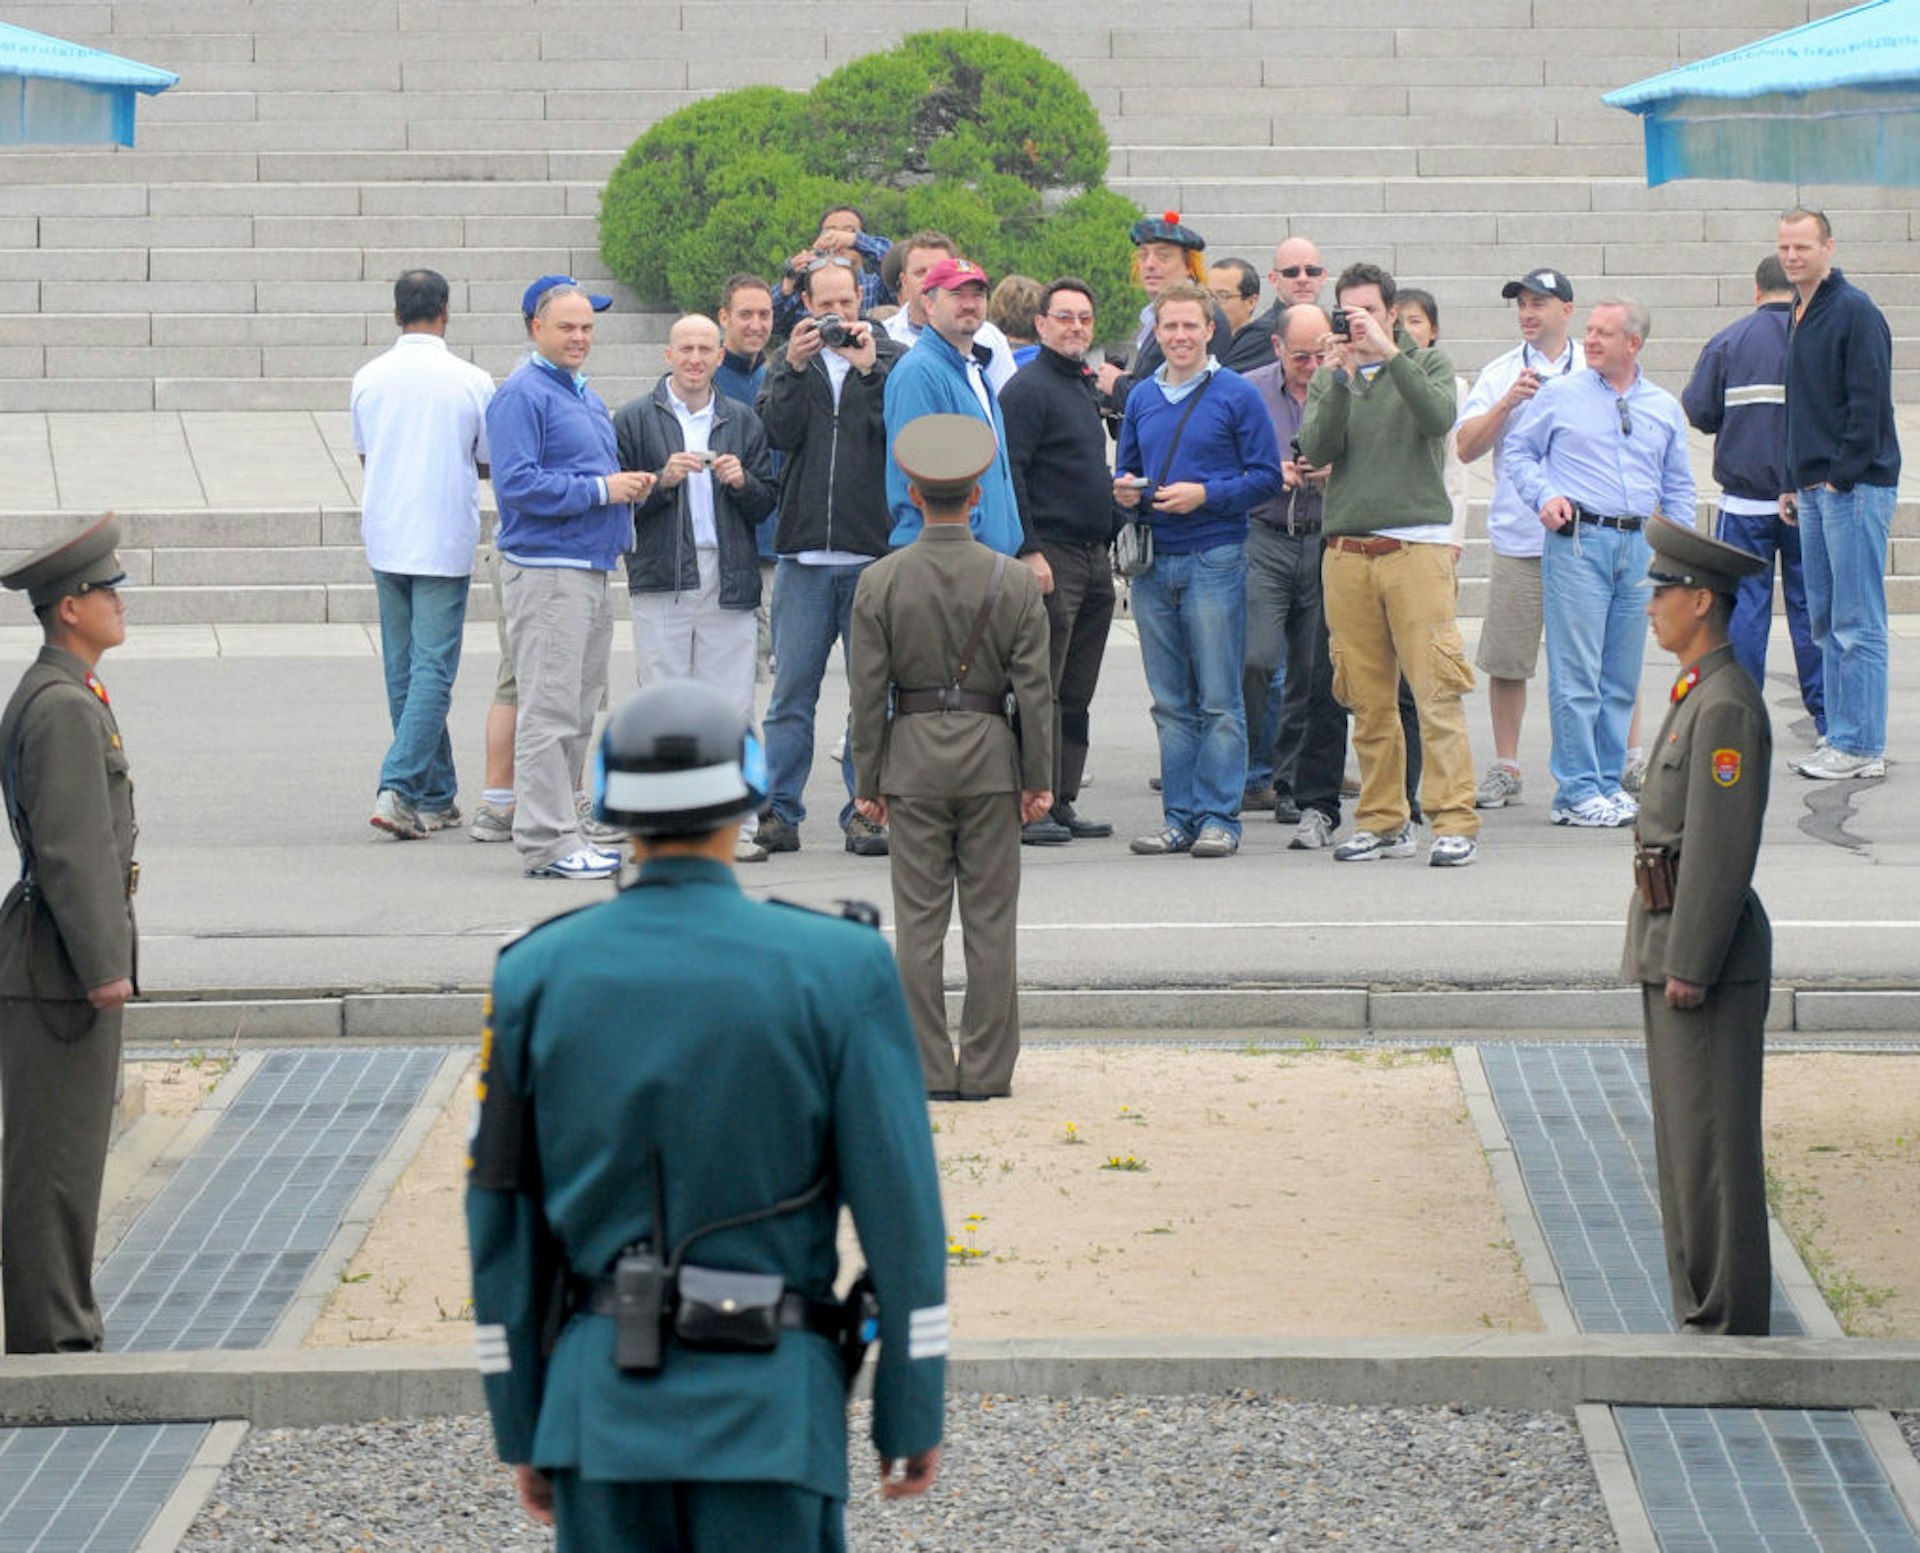 Foreign tourists on a tour of North Korea take pictures of South Korea on April 30, 2008 as they stand on the North Korean side of the border village of Panmunjom in the demilitarized zone that has separated the two Koreas since the Korean War